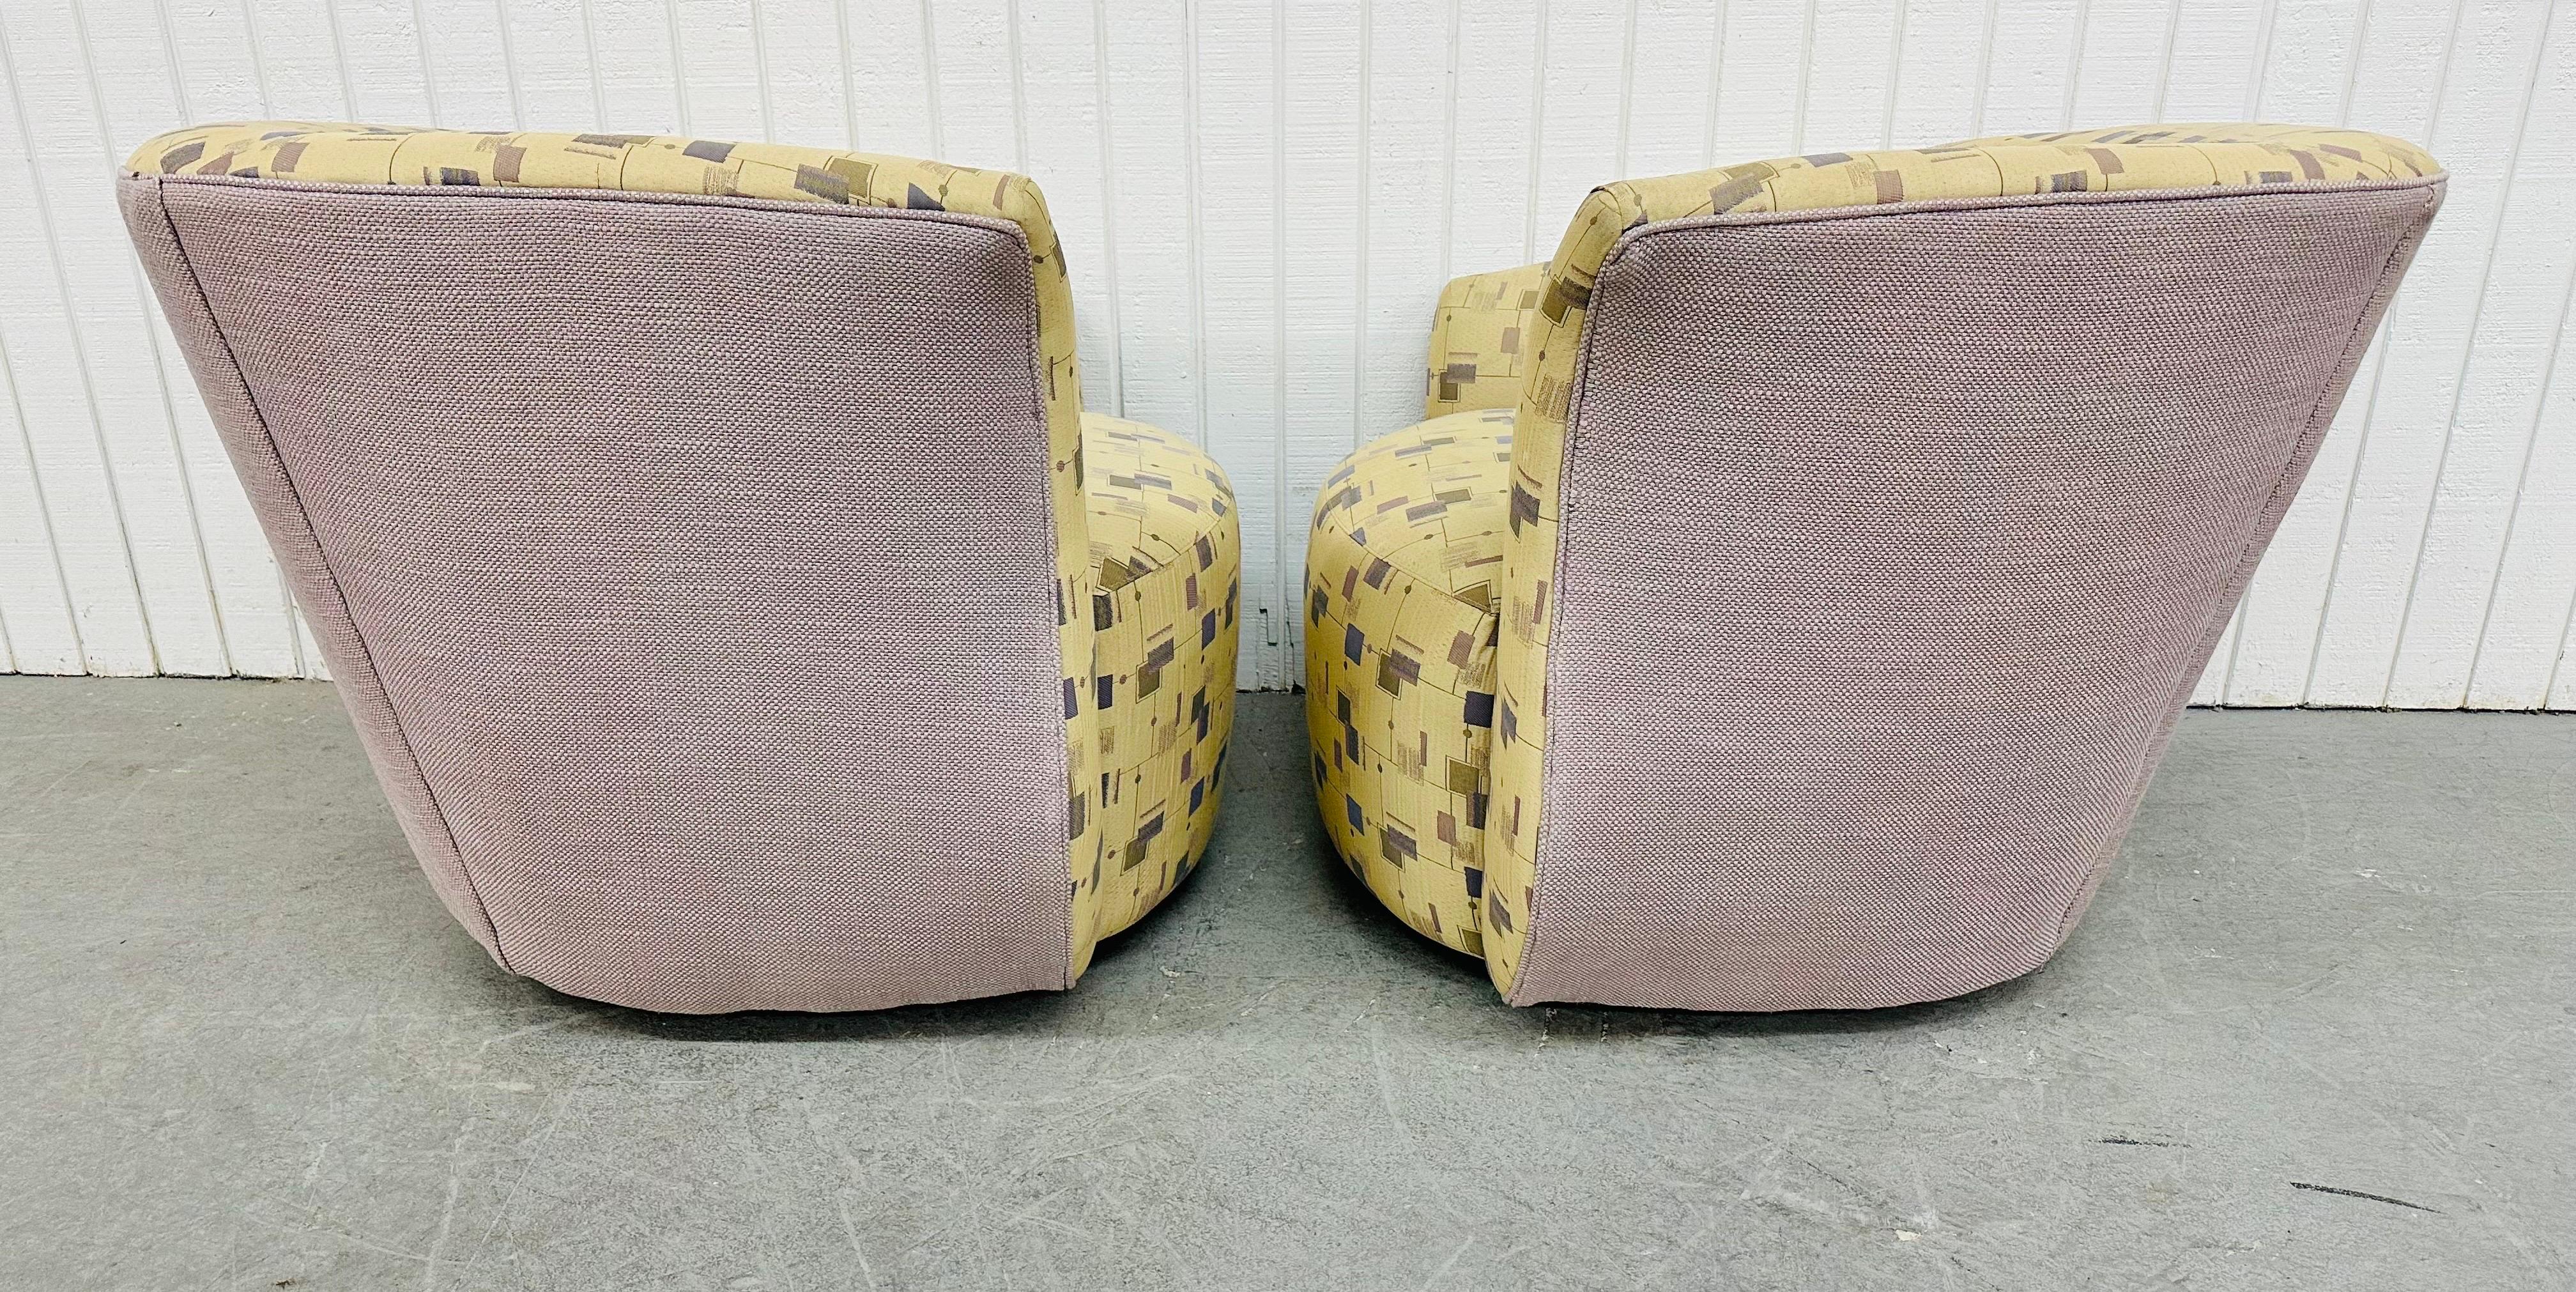 Upholstery Post Modern Oversized Swivel Chairs - Set of 2 For Sale